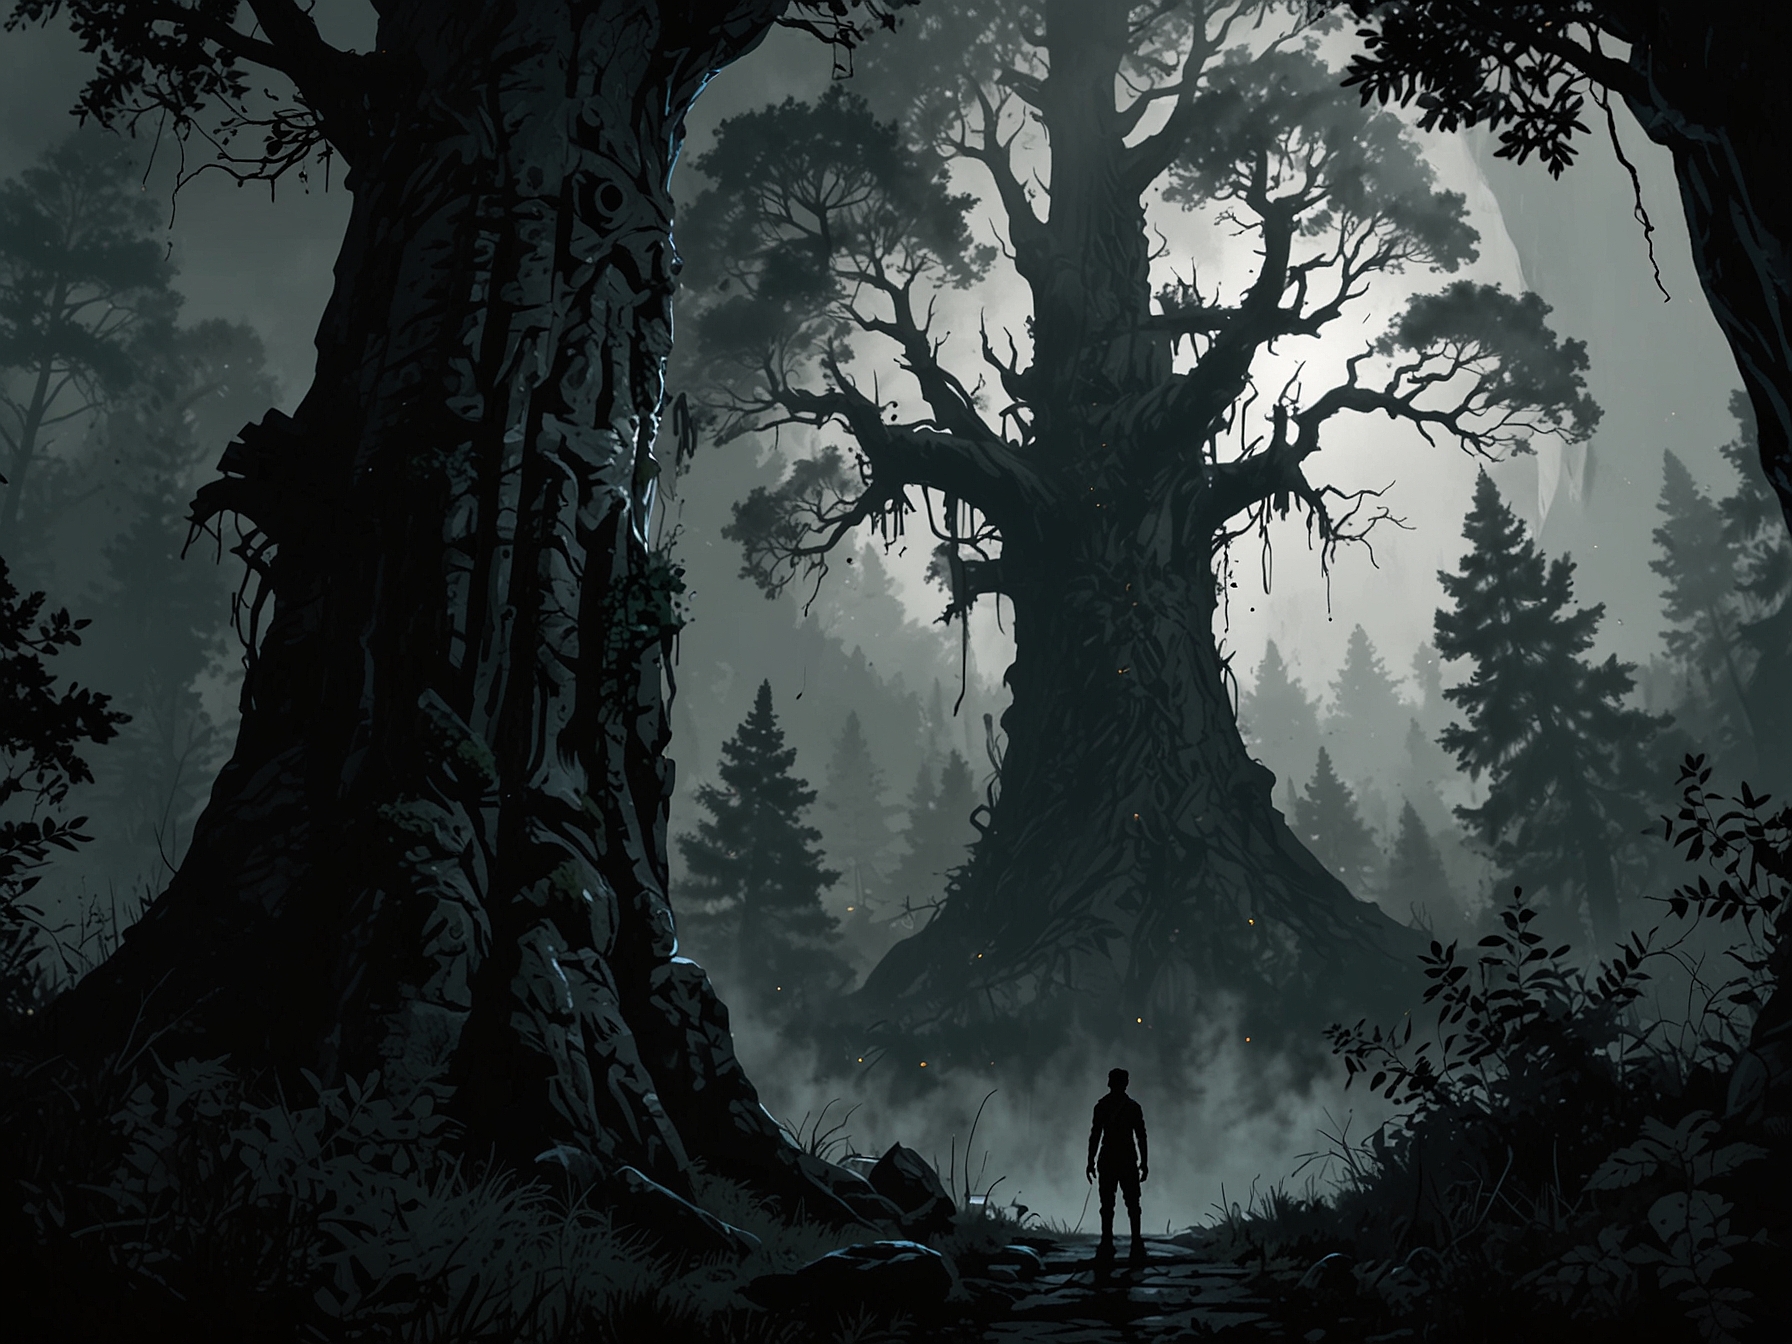 Illustration of a player character gazing up at the towering and mysterious Erdtree, with dark, eerie forests surrounding the landscape, setting the tone of the expansion.